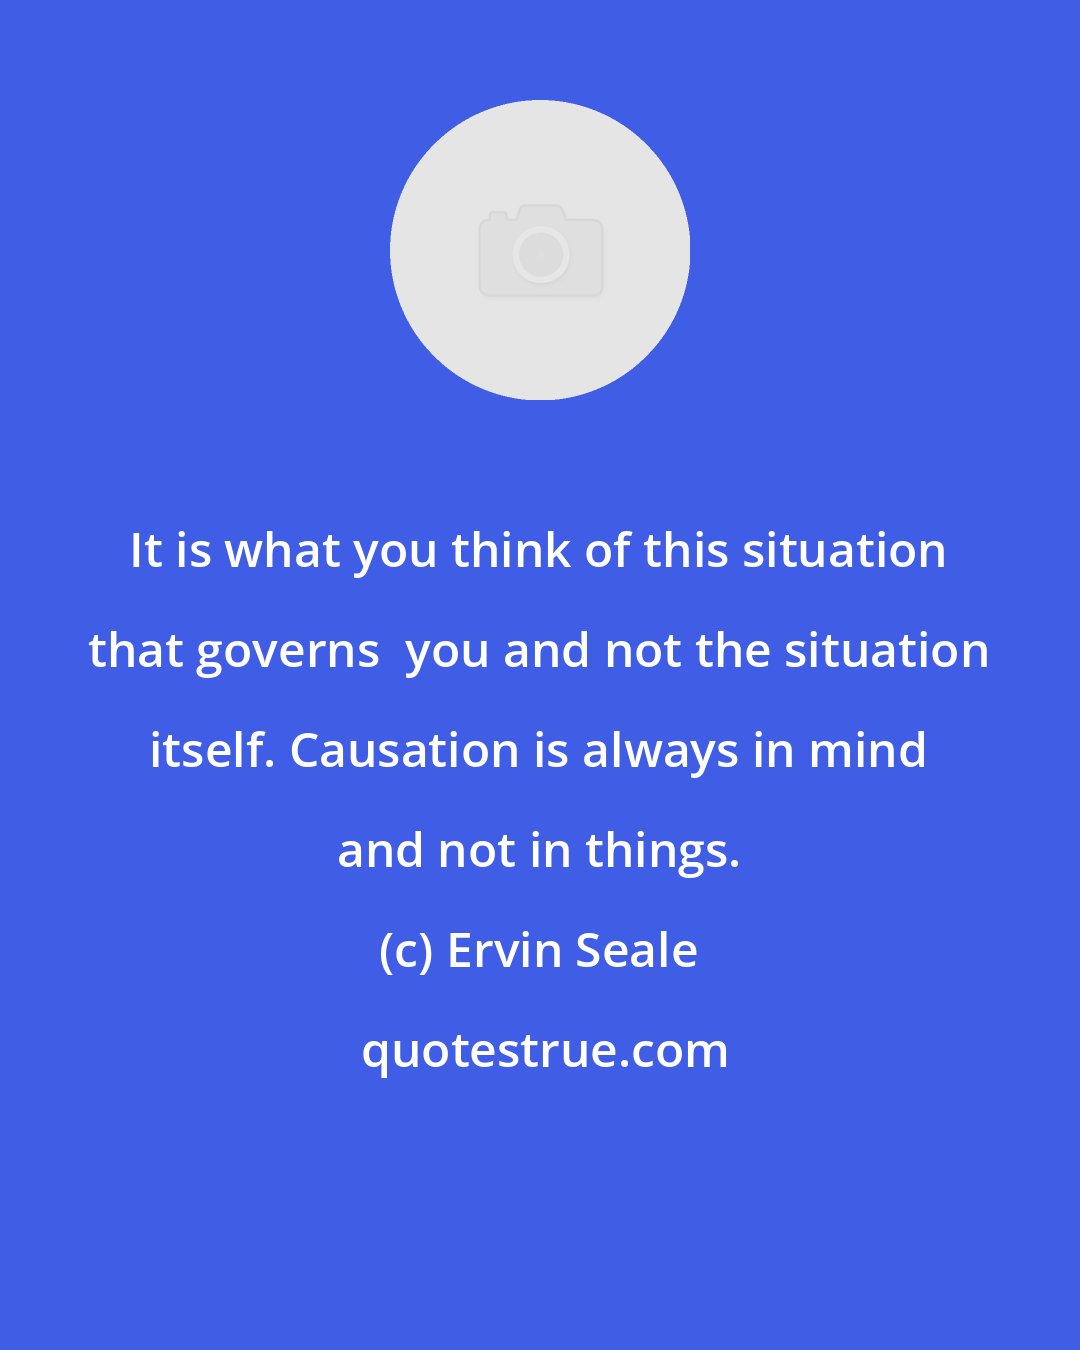 Ervin Seale: It is what you think of this situation that governs  you and not the situation itself. Causation is always in mind and not in things.